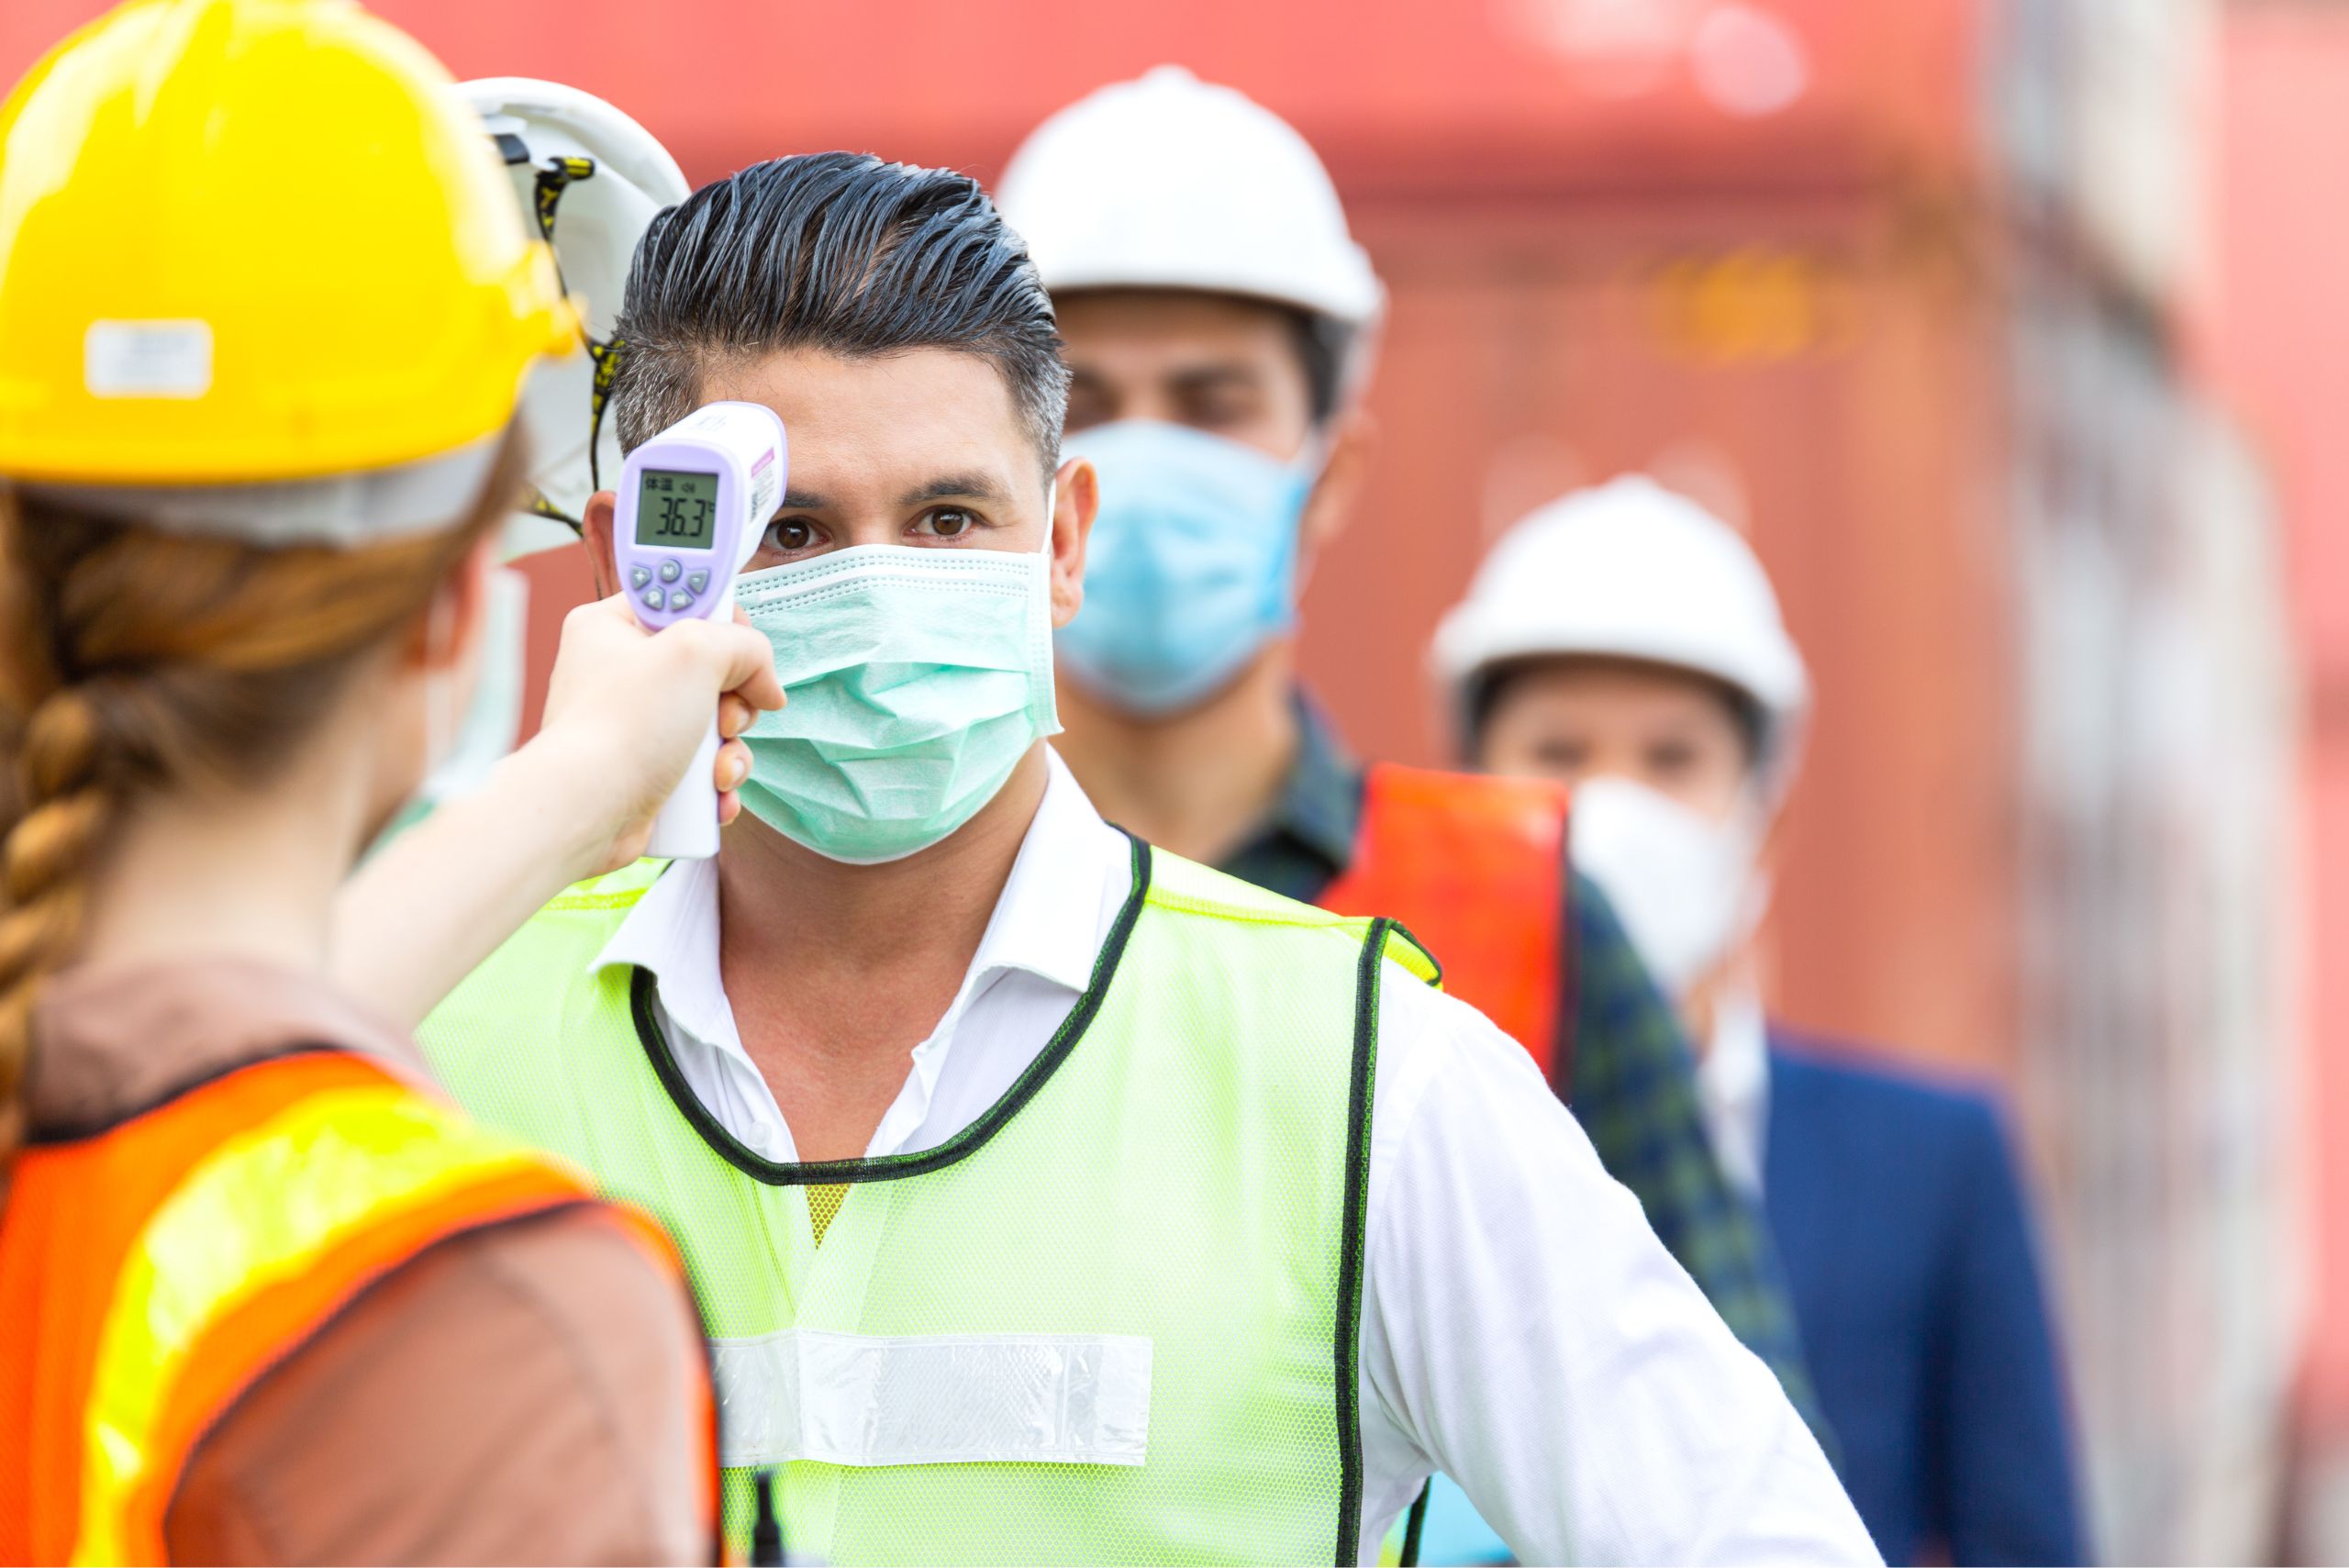 A female employee is using a temperature scanning device to check the construction worker's body temperature as part of their health and safety measures.